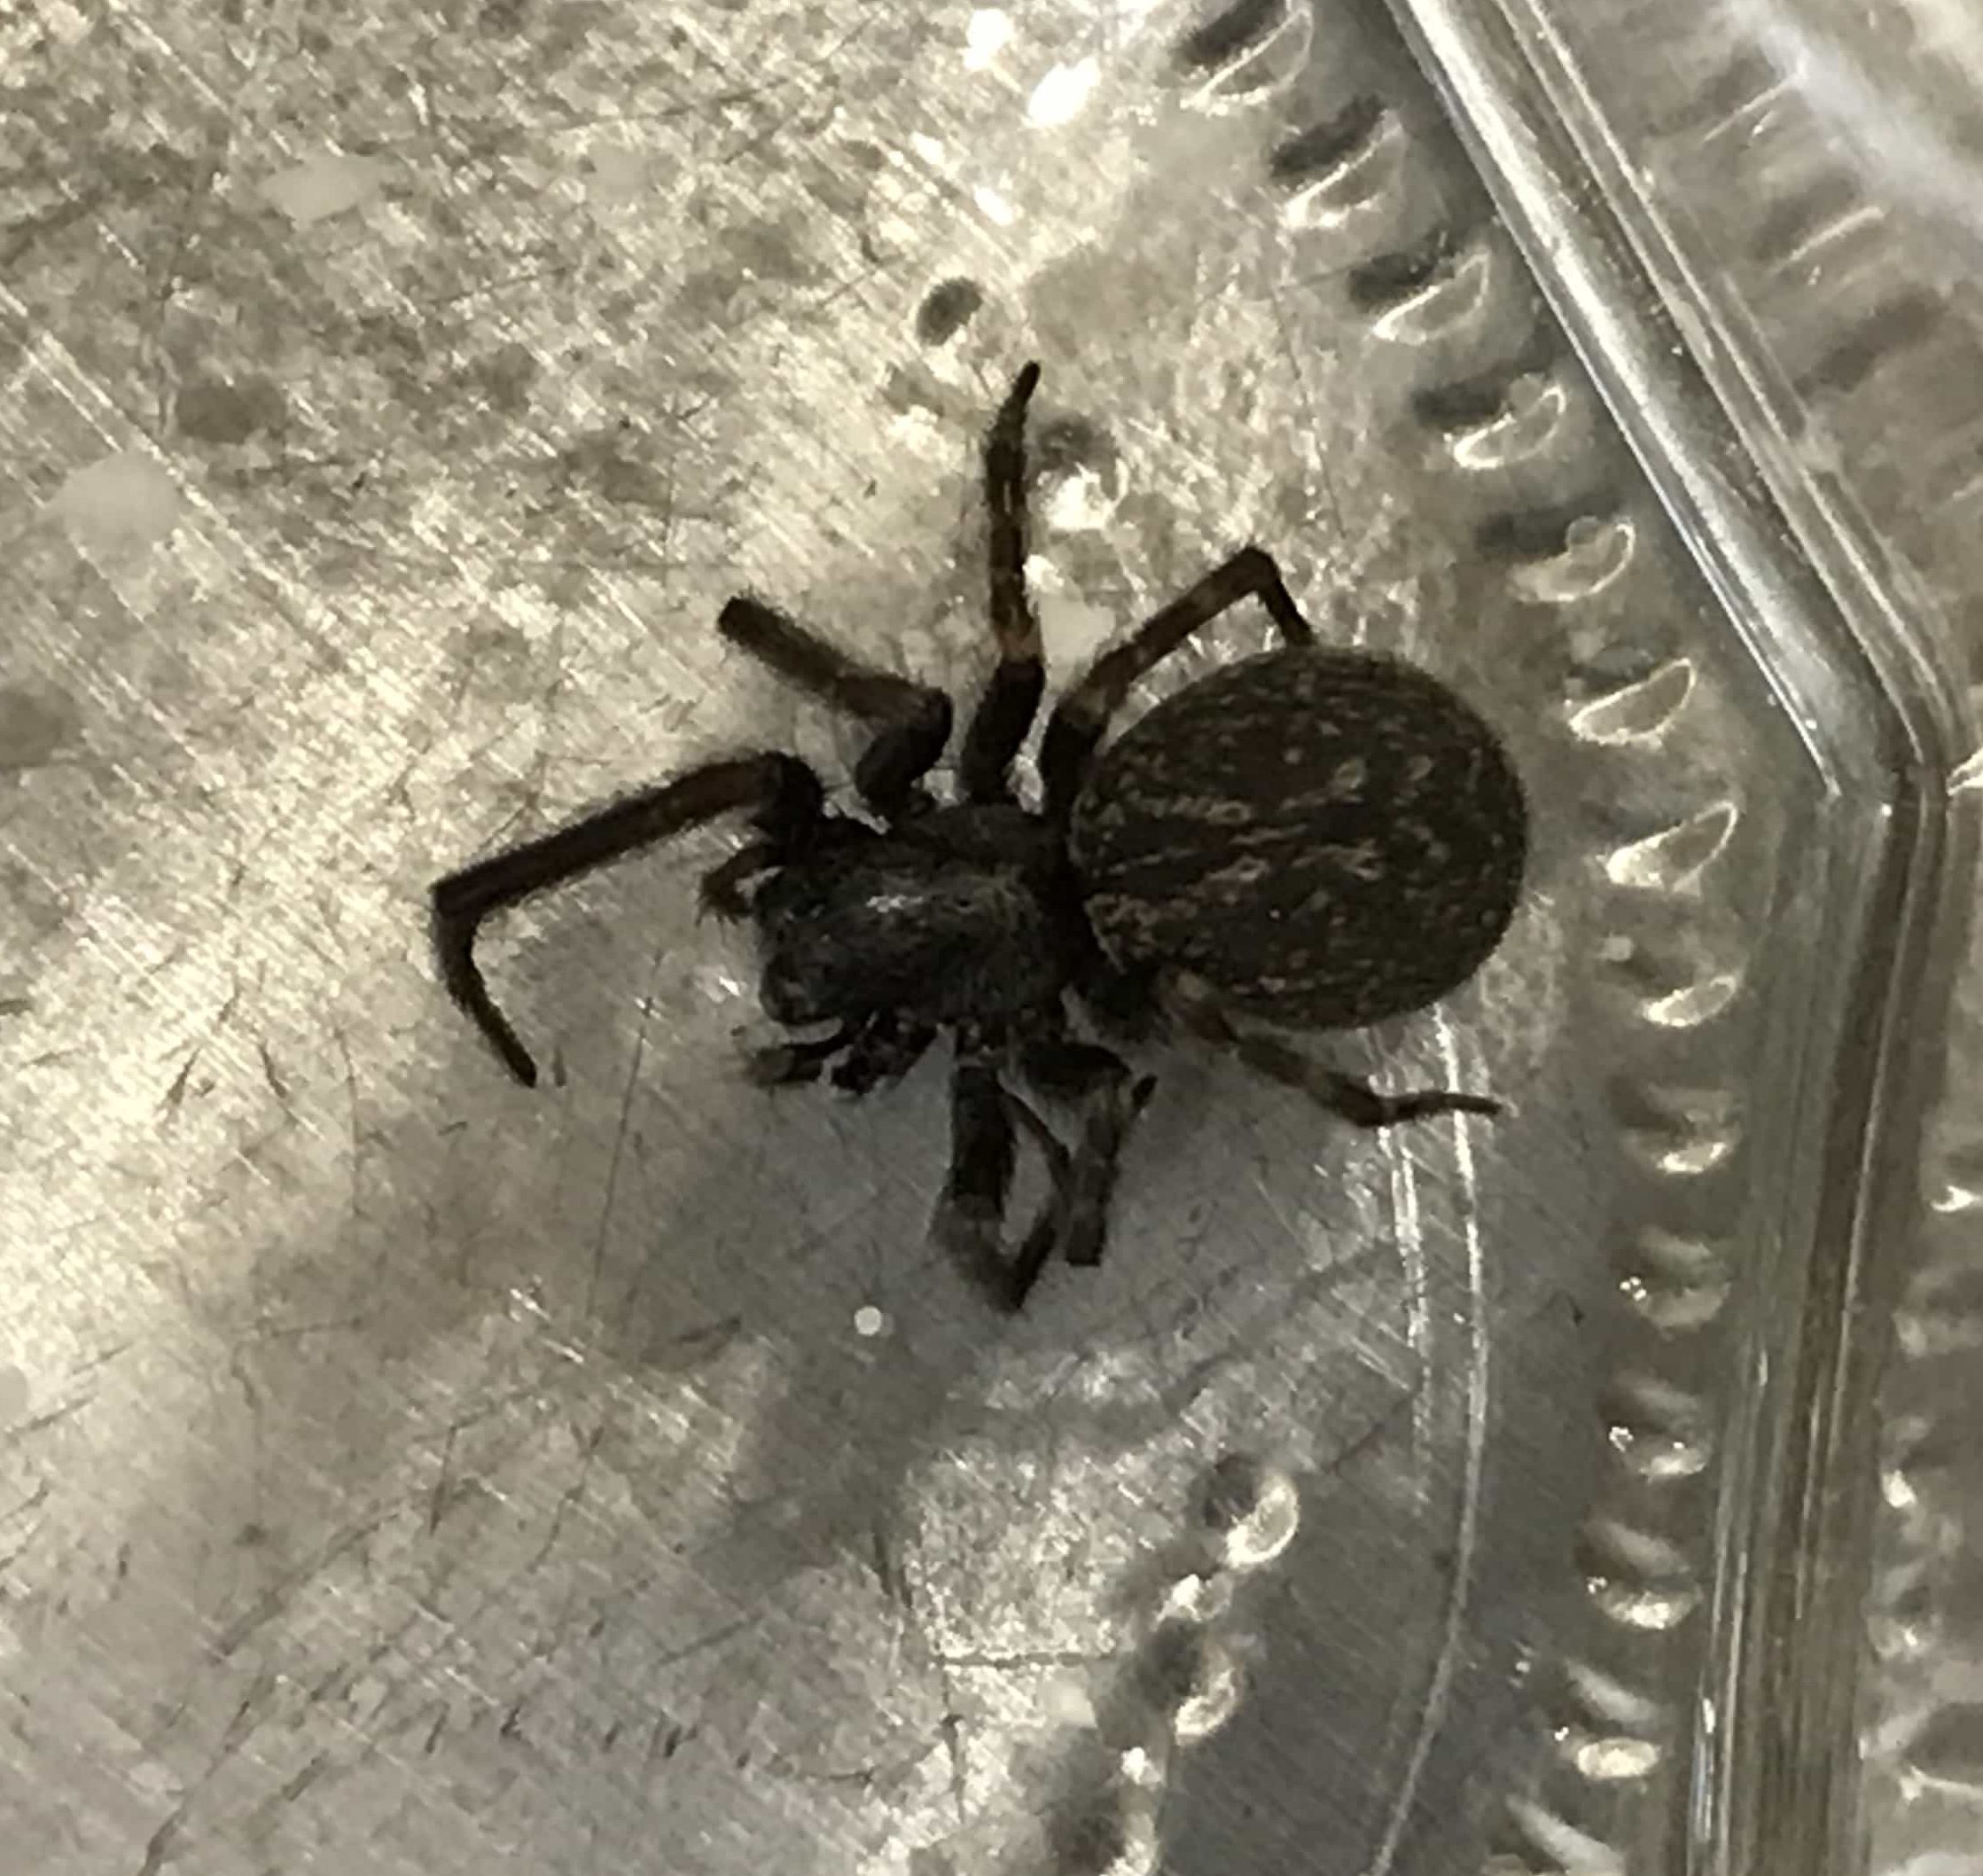 Picture of Badumna insignis (Black House Spider) - Dorsal